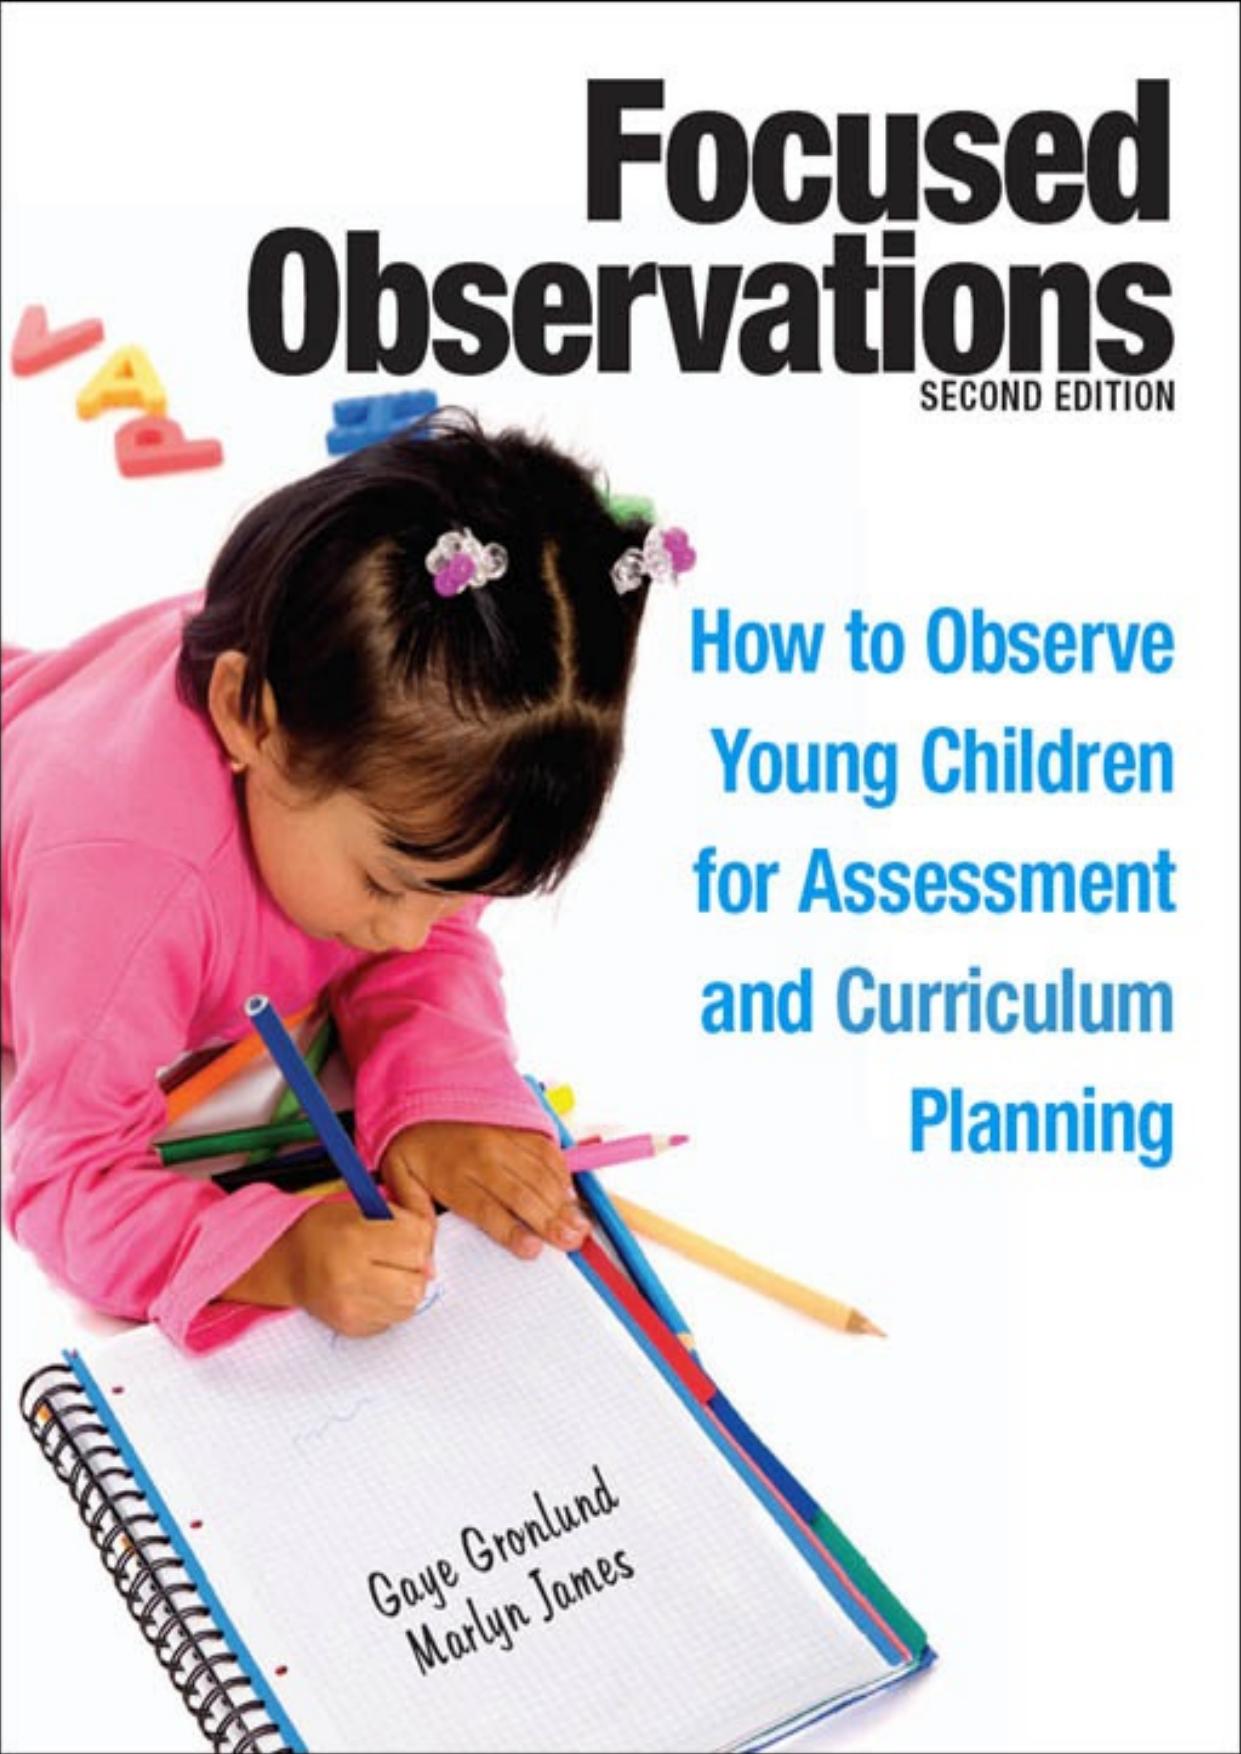 Focused Observations_ How to Observe Young Children for Assessment and Curriculum Planning.jpg